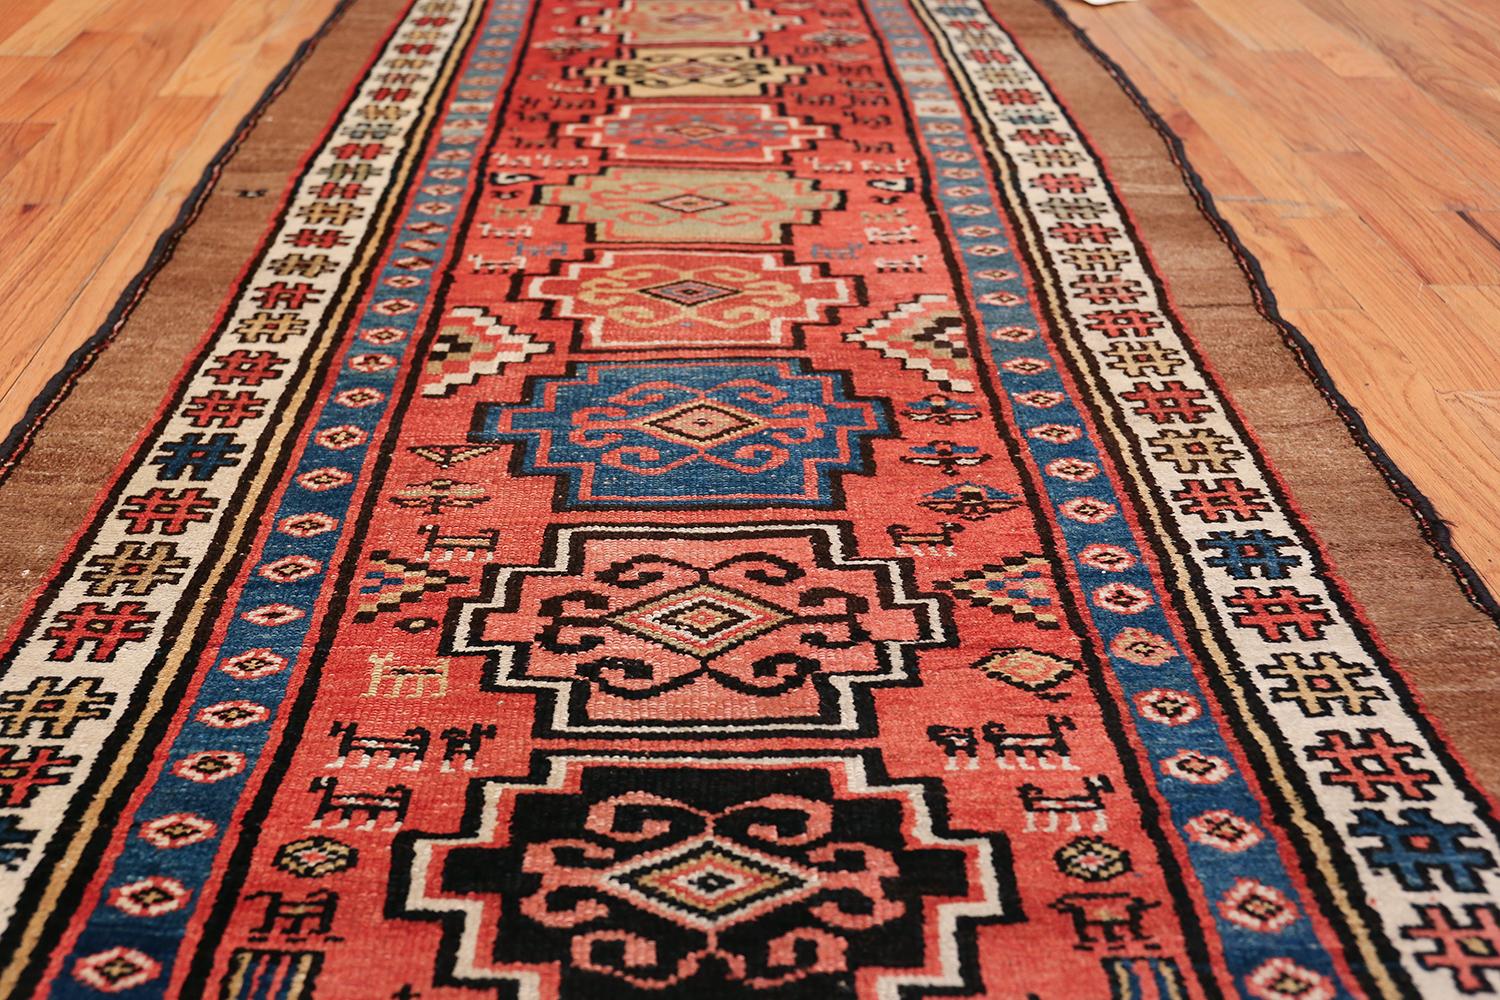 Tribal Antique Persian Northwest Rug. Size: 3 ft 6 in x 8 ft 4 in (1.07 m x 2.54 m)